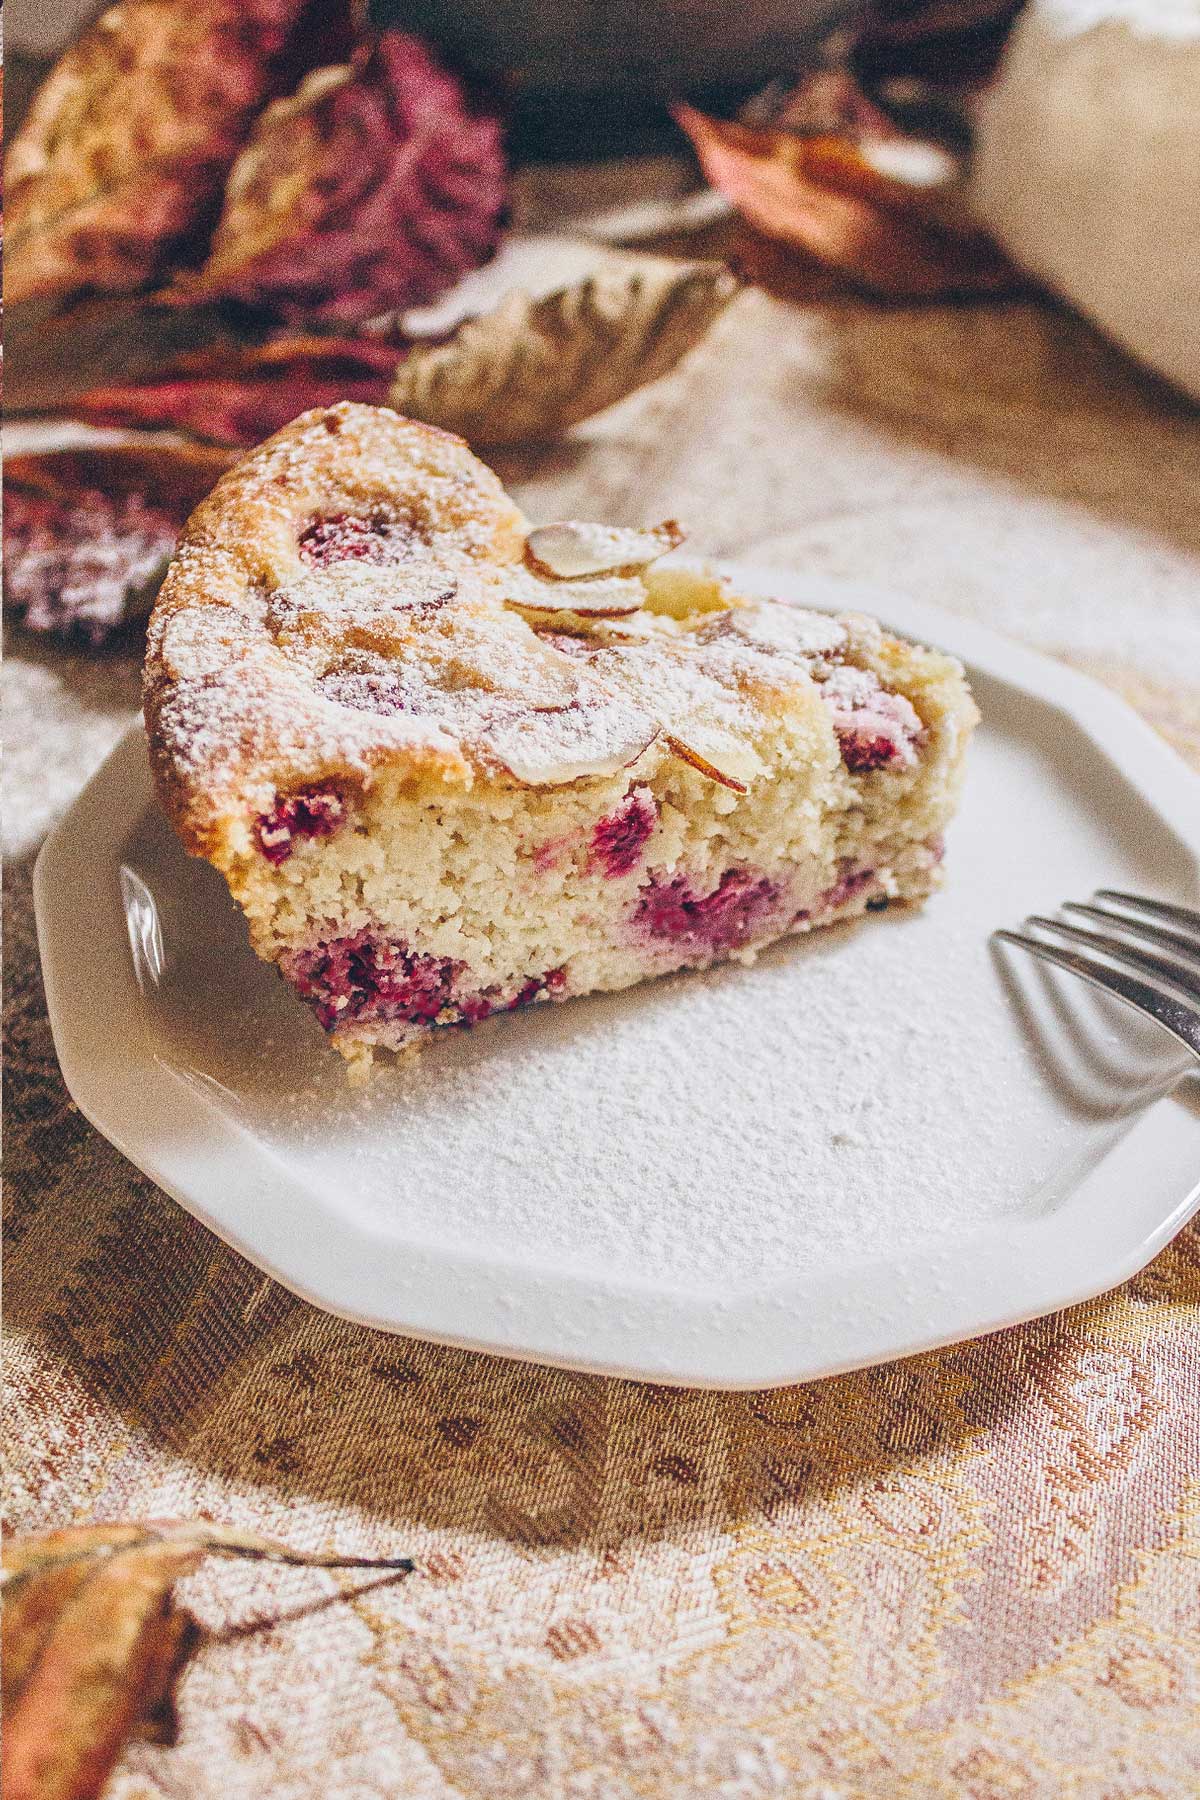 A slice of Raspberry Almond cake on a white plate on a table with dried burgundy red leaves and a pale sand colored paisley tablecloth. The cake is dusted with powdered sugar.